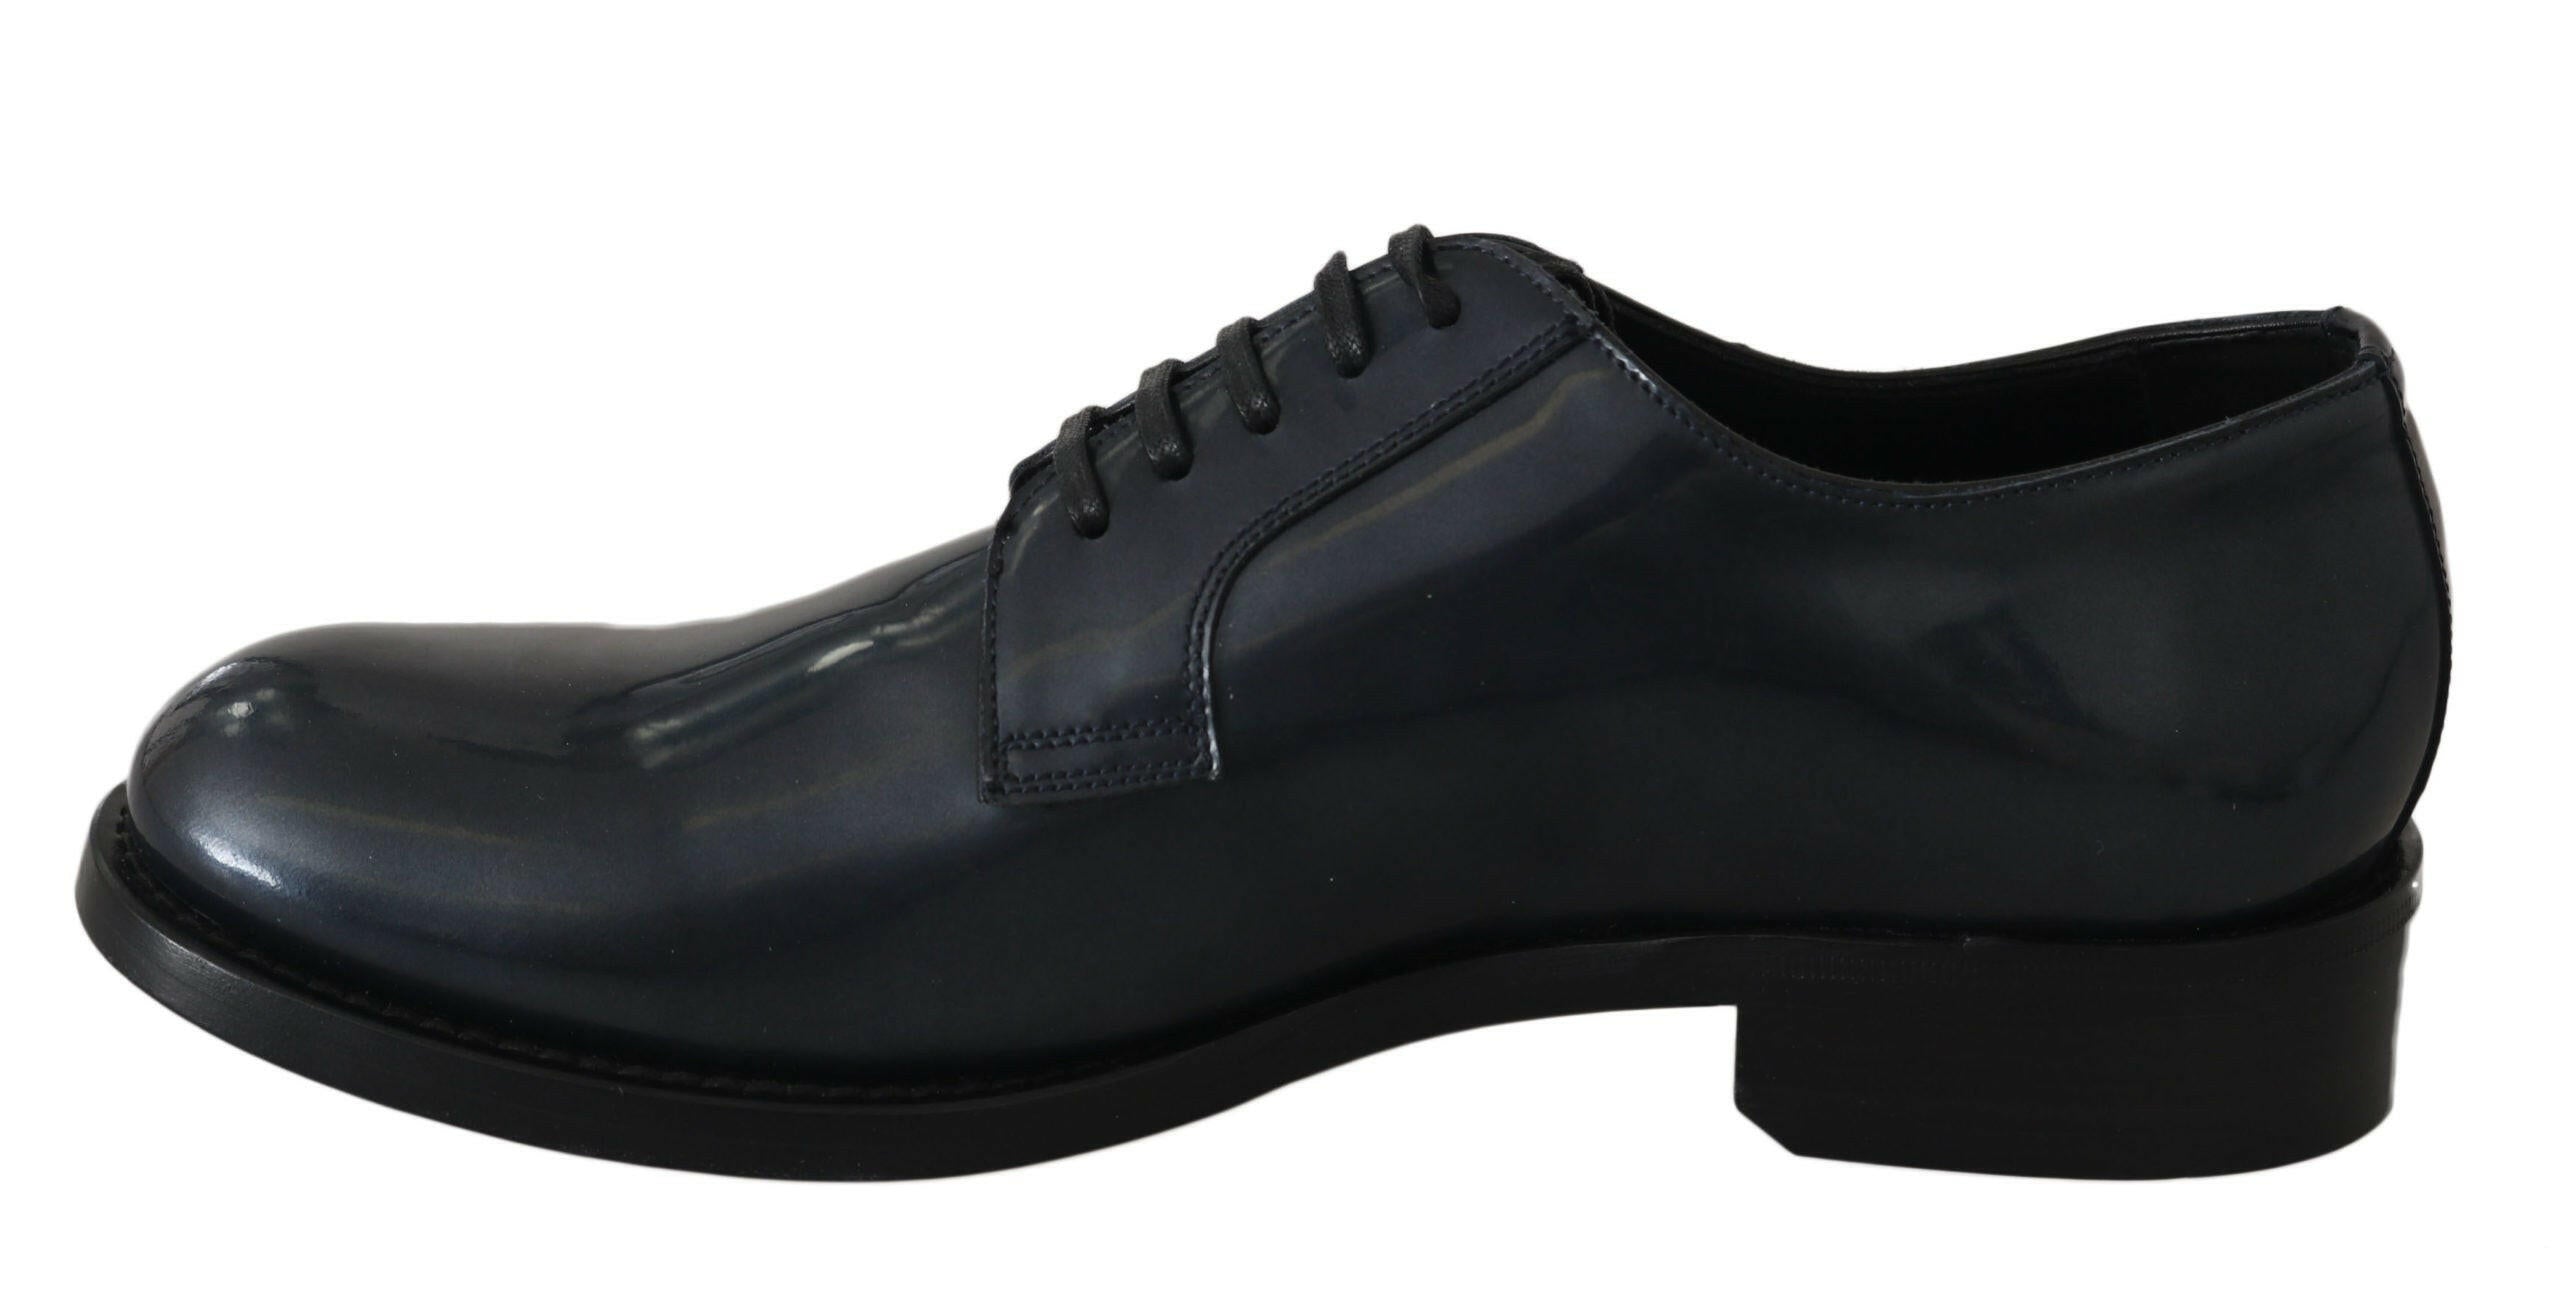 Dolce & Gabbana Blue Leather Derby Dress Formal Shoes - GENUINE AUTHENTIC BRAND LLC  